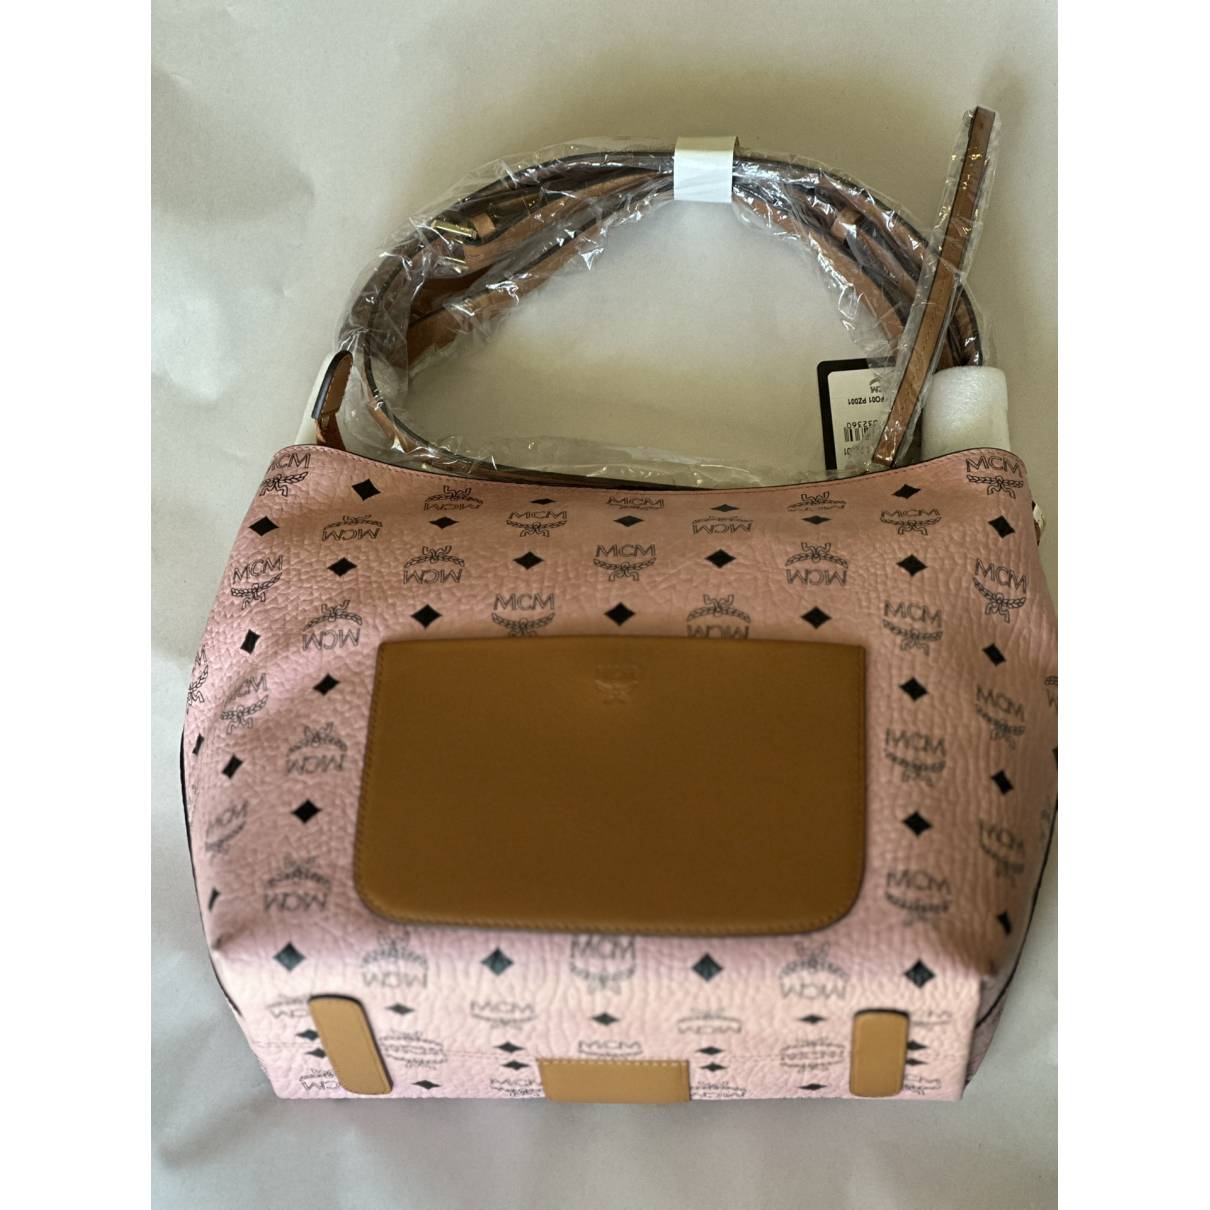 Mcm - Authenticated Stark Handbag - Cloth Pink for Women, Never Worn, with Tag